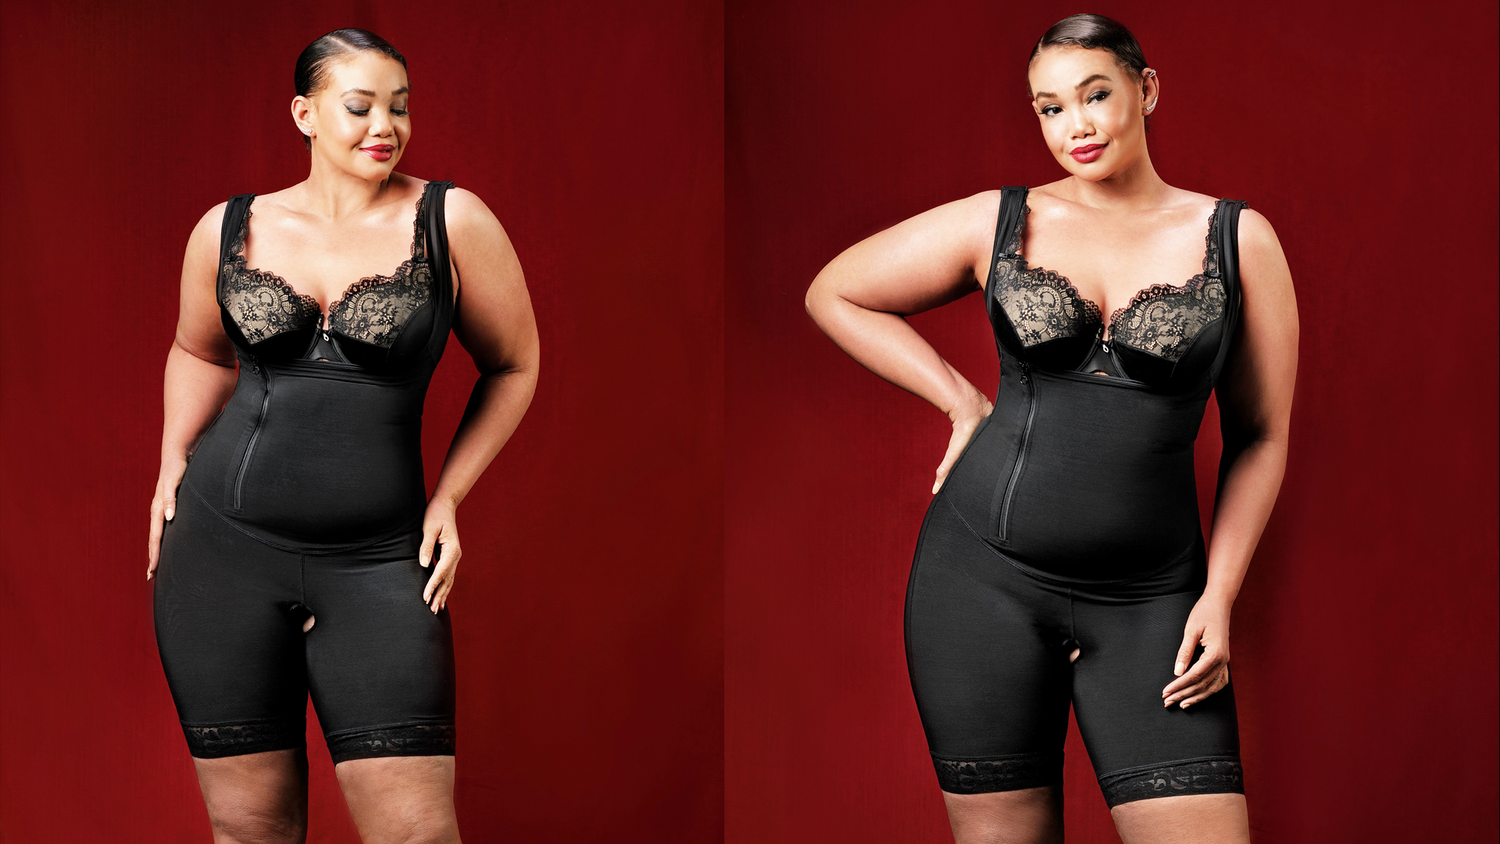 Looking for the best Post Surgical Shapewear Compression Garments? Here it is... Diva's curves Proud to bring Doctor's Favorite Our Post Surgical Compression Full Coverage Shapewear Garments. Best Reviewed by Women.